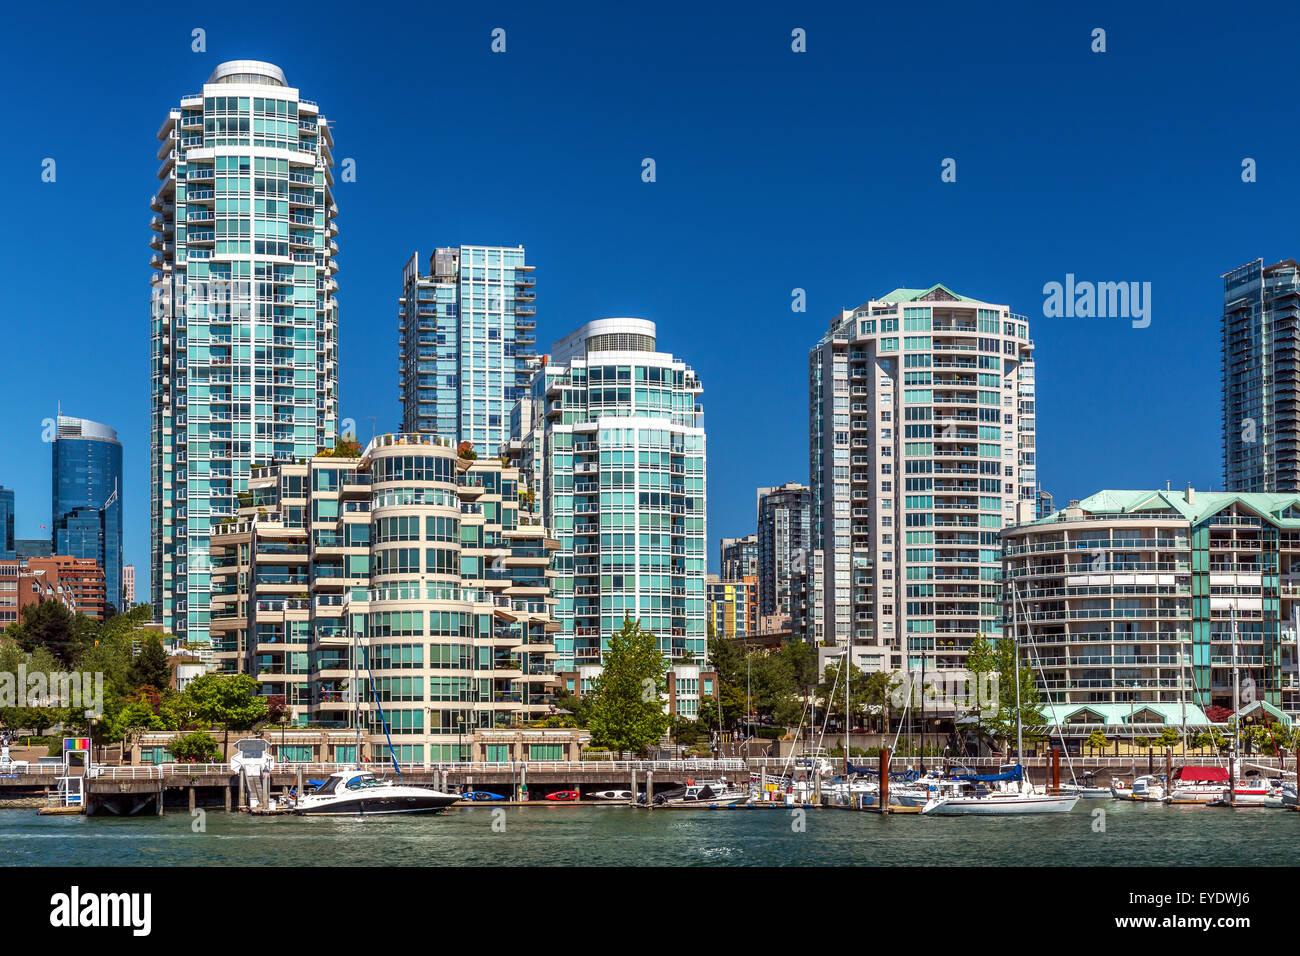 City skyline of Vancouver, British Columbia, Canada, as seen from the water Stock Photo